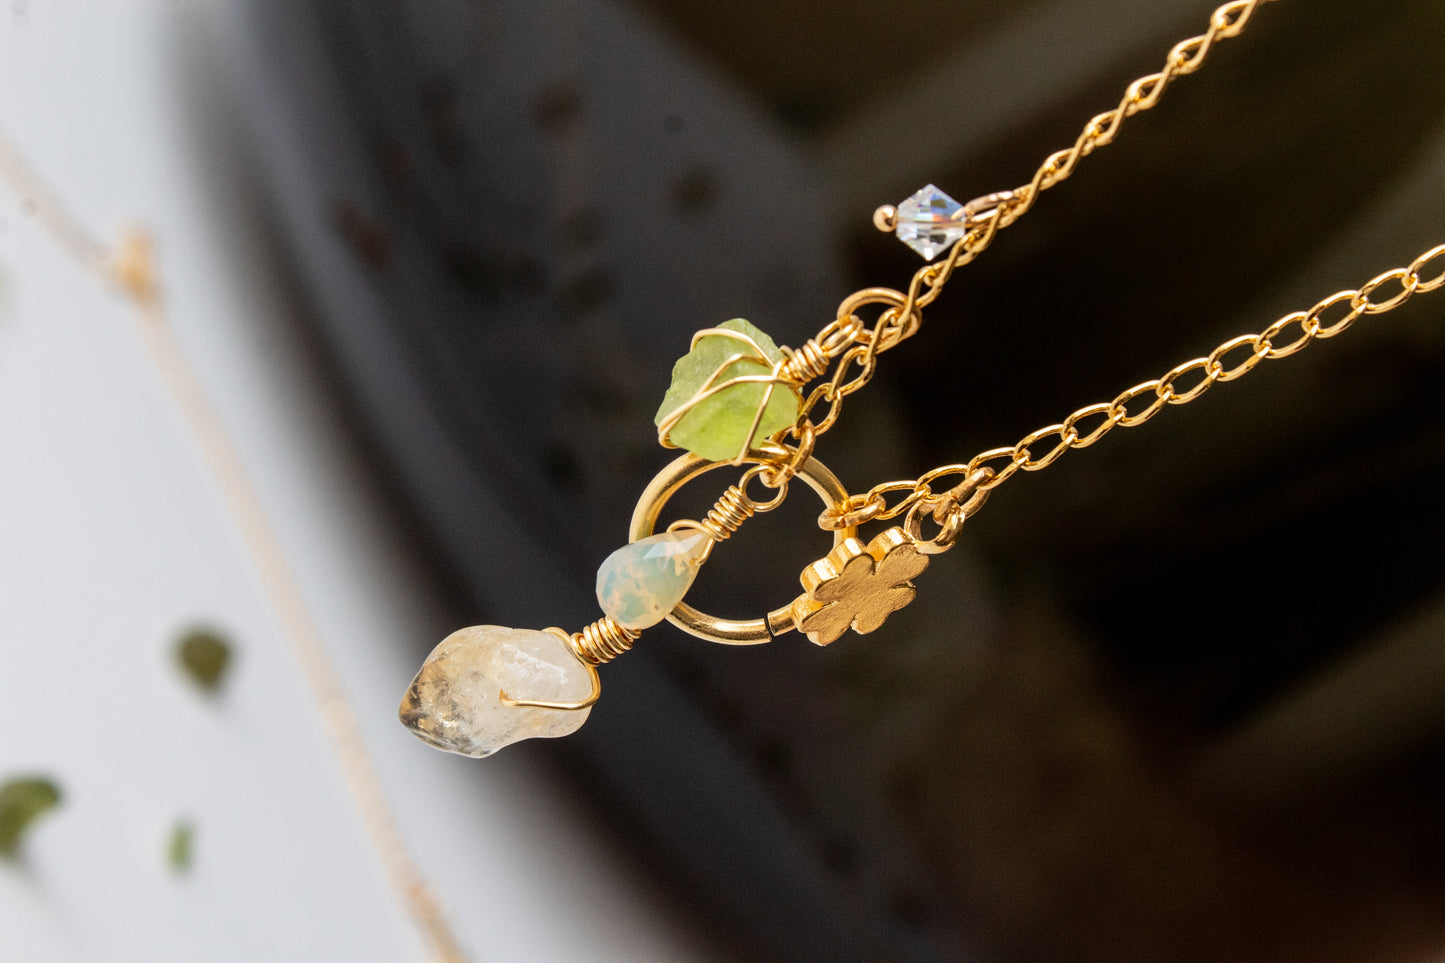 Joy. Necklace with peridot, opal and citrine